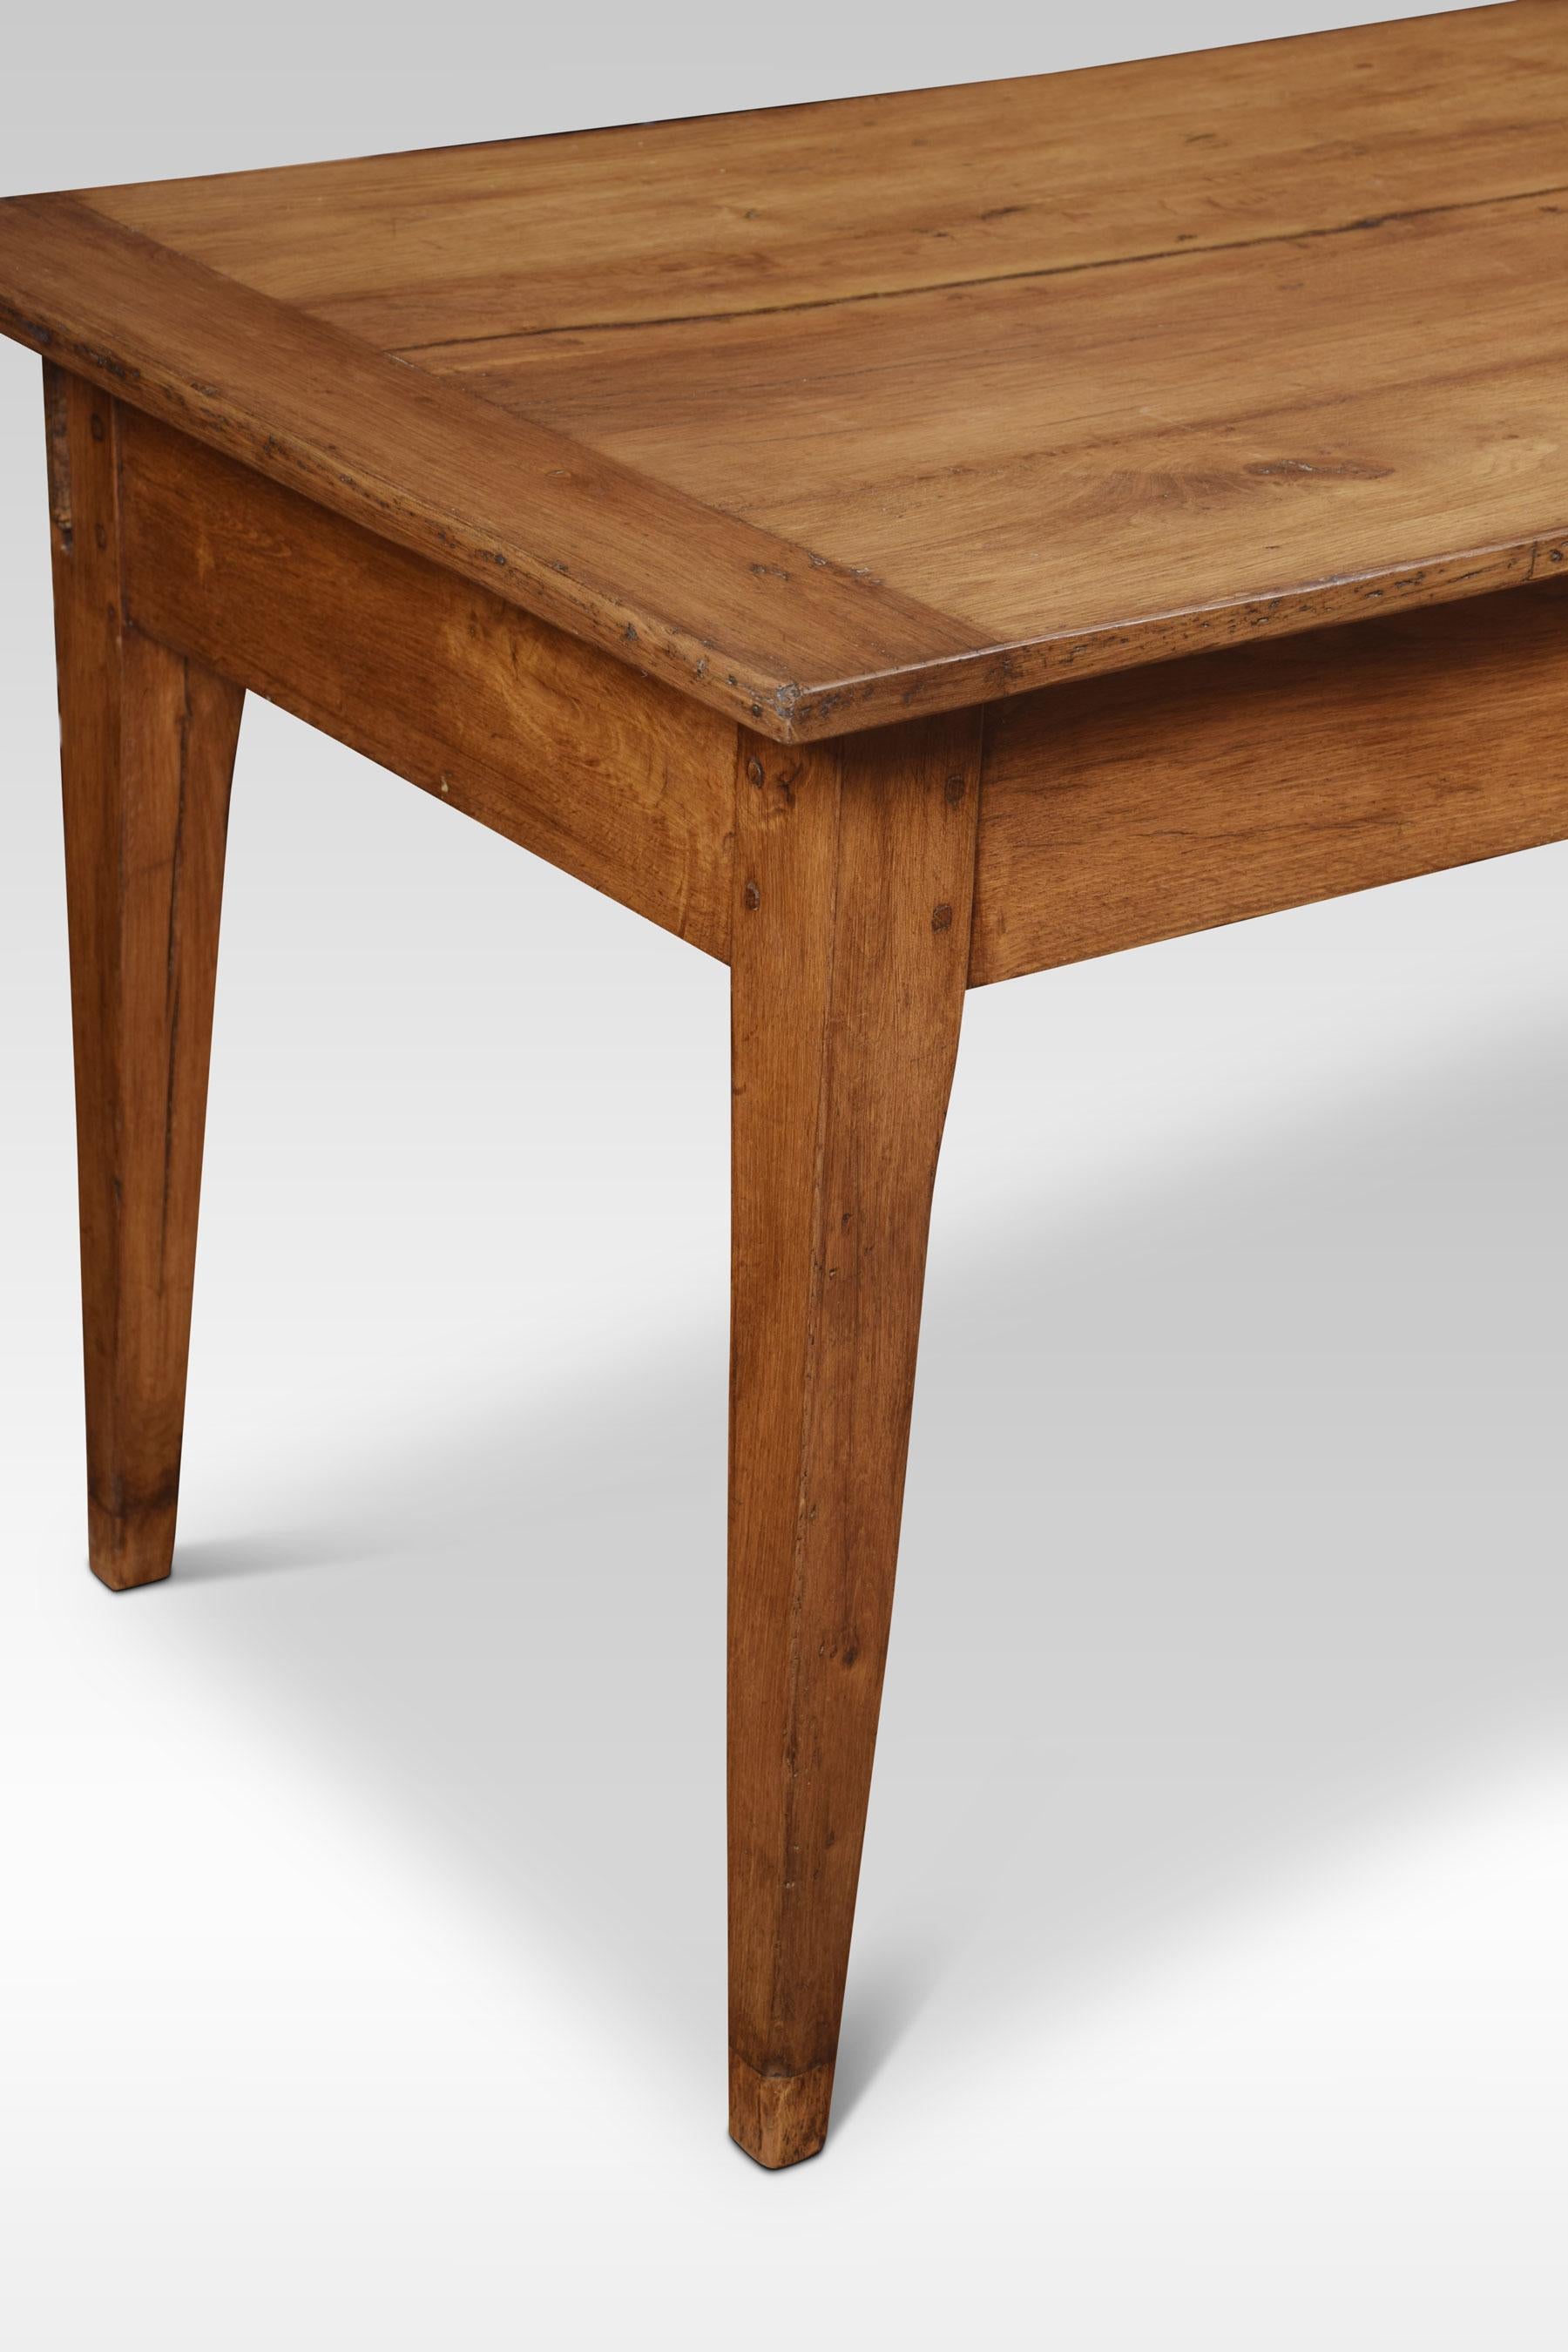 A large oak farmhouse table, the rectangular plank top over a central frieze draw flanked by unusual sliding cupboards. Raised up on slender tapered legs.
Dimensions:
Height 31 inches
Width 94 inches
Depth 32.5 inches.